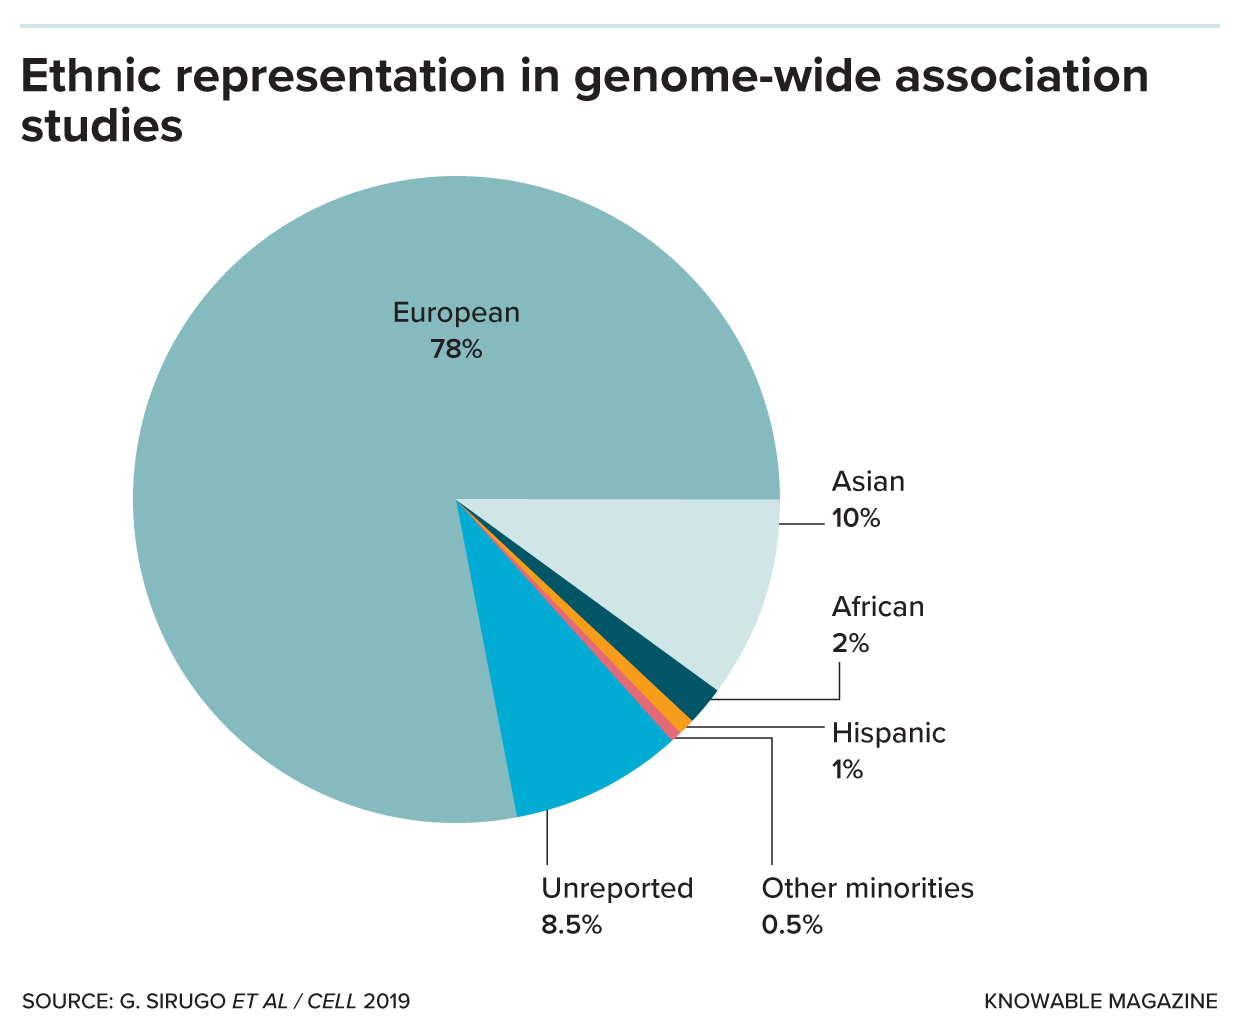 A pie chart shows 78% European, 10% Asian, 2% African, 1% Hispanic, 0.5% other minorities, and 8.5% unreported. These are the representation of these ethnic groups in genome-wise association studies.